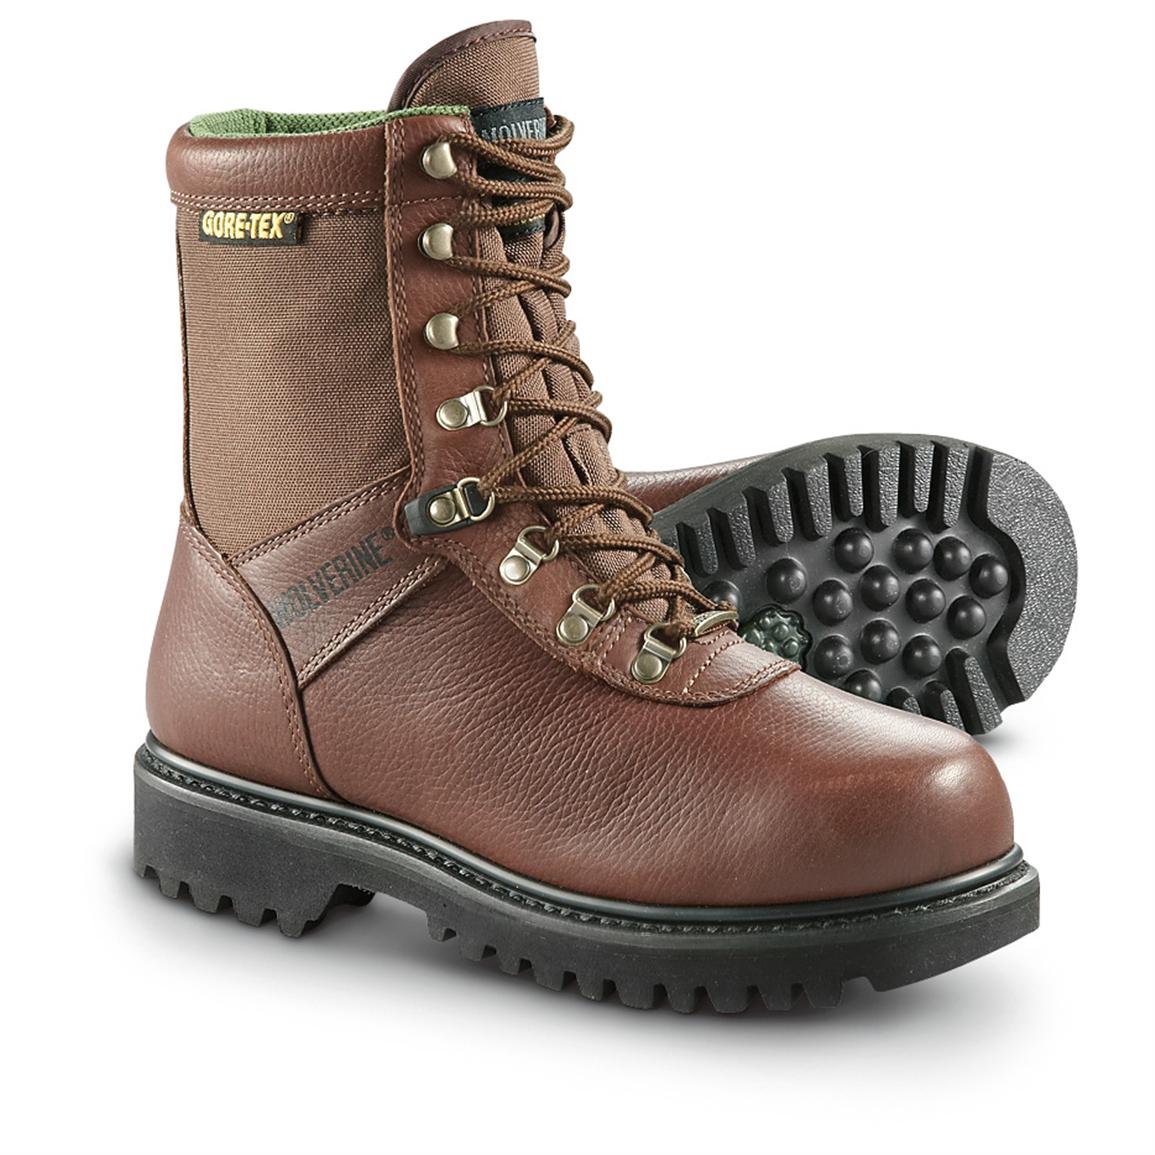 wolverine thinsulate boots 800f6a